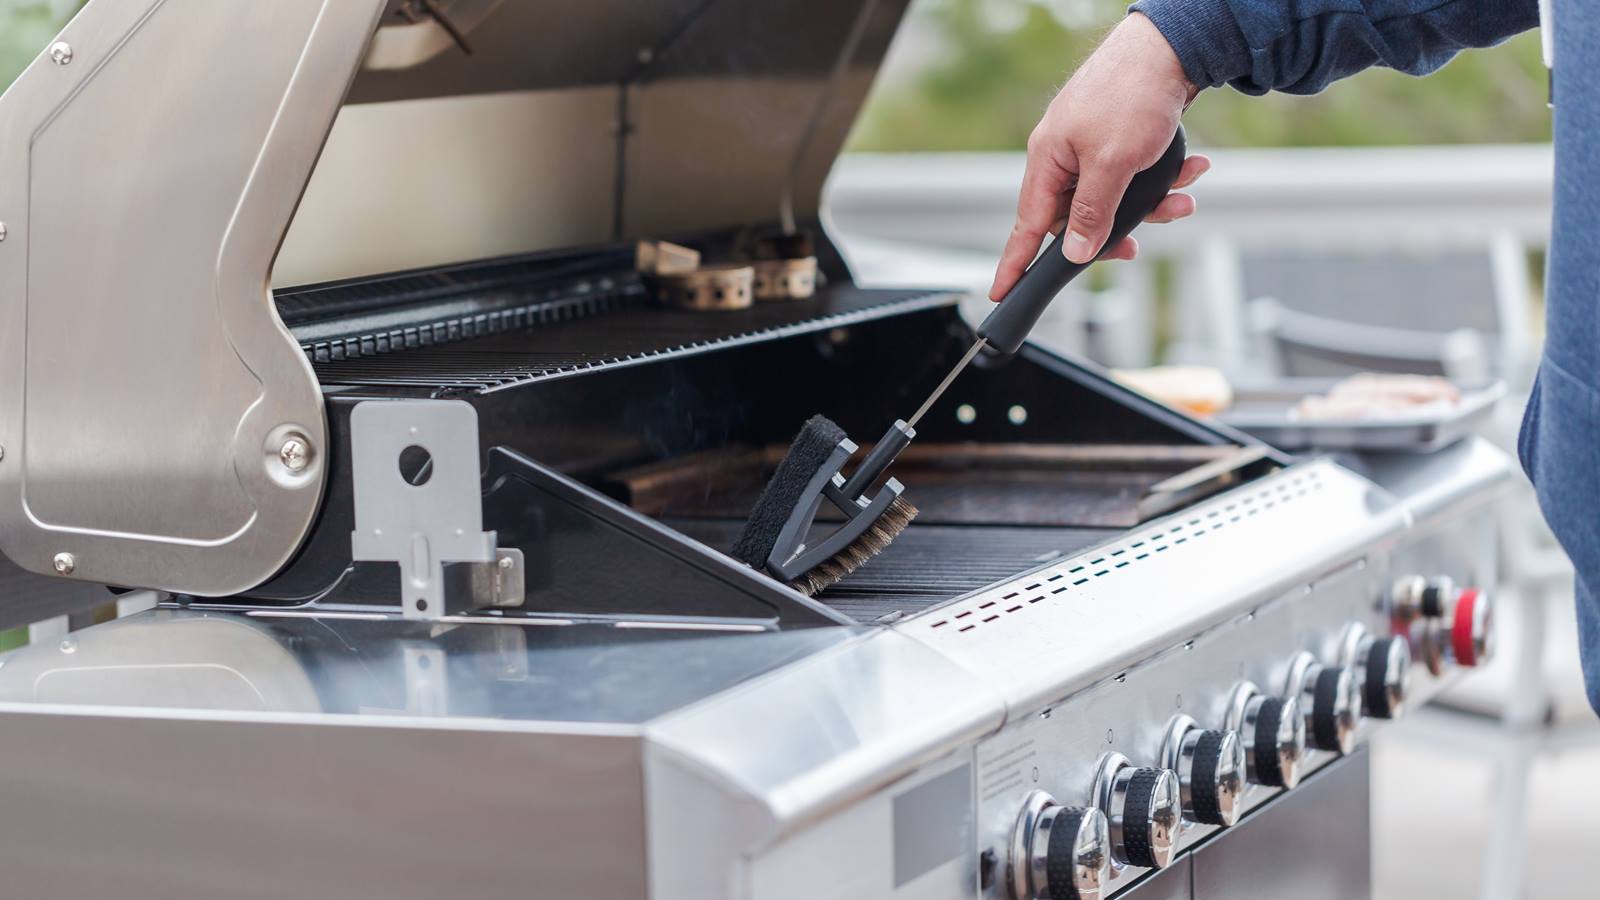 12 Grill safety tips